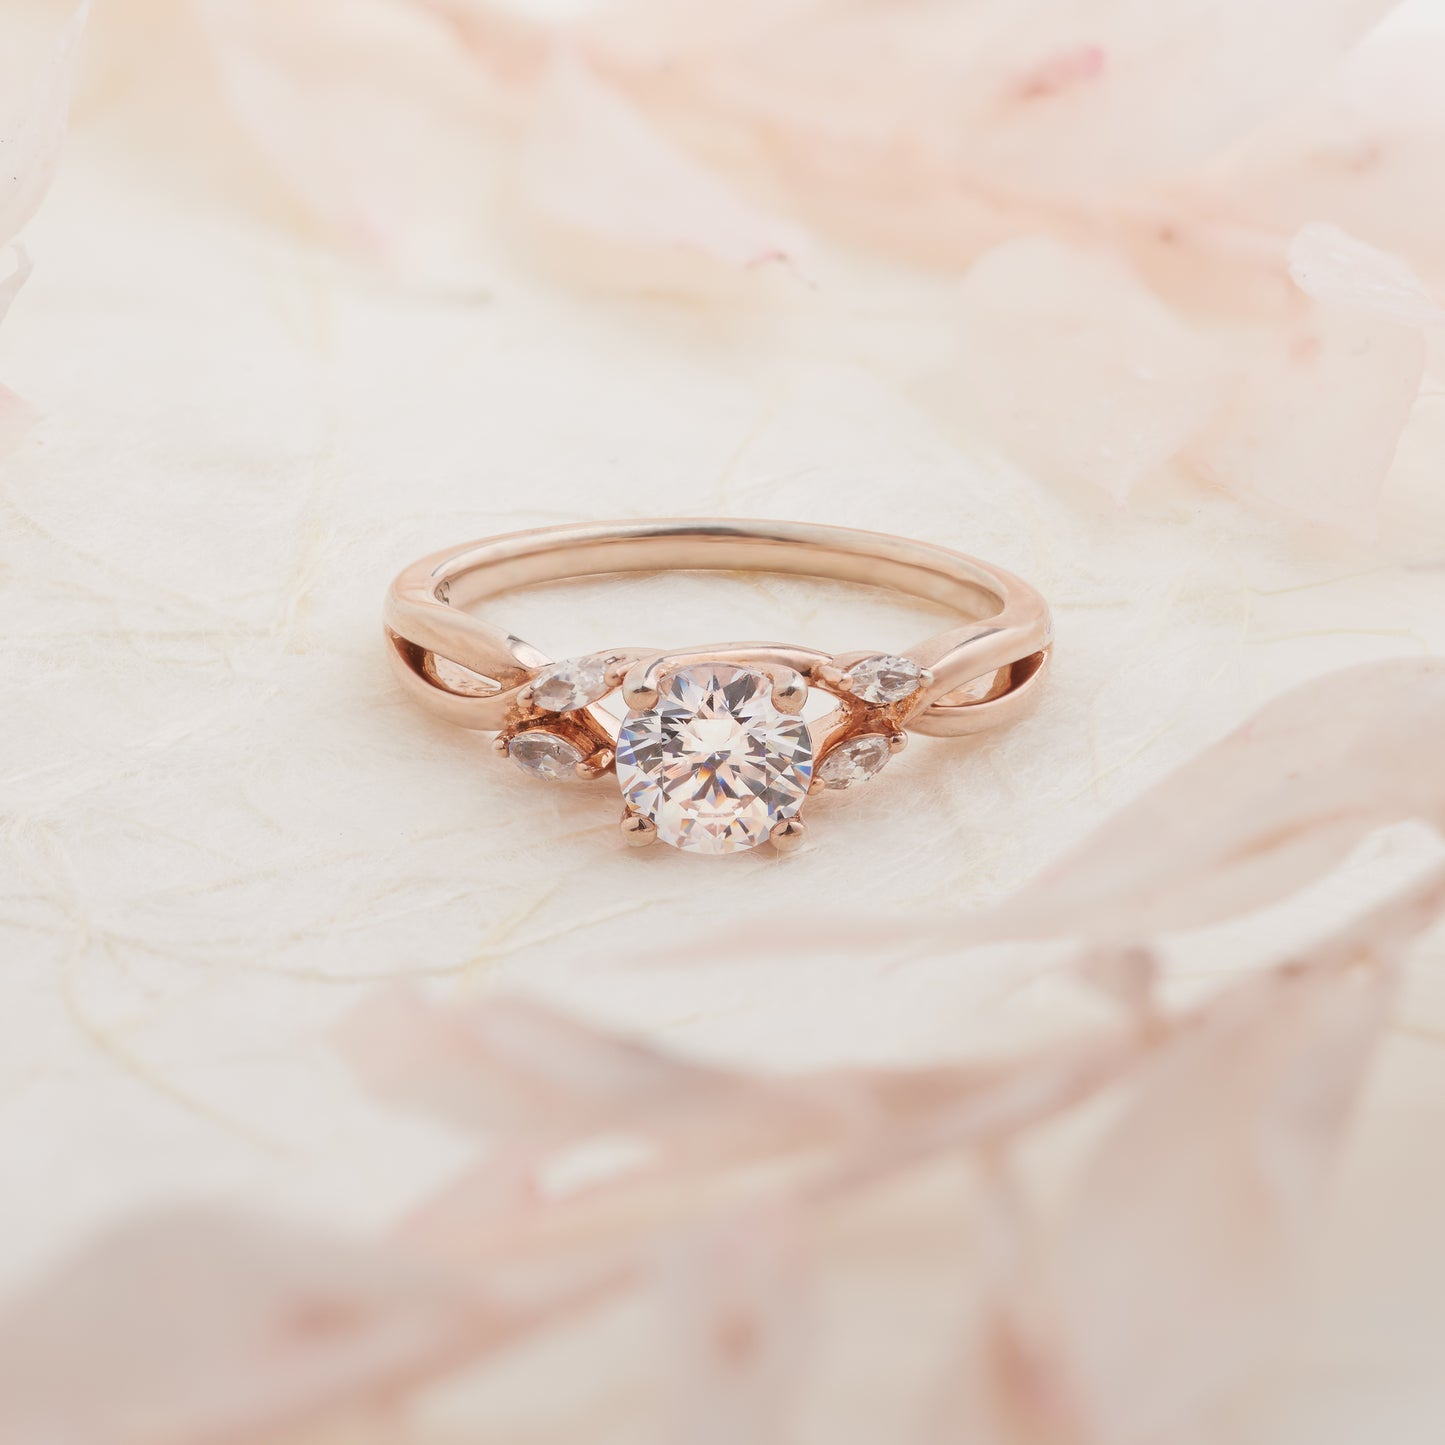 18K Rose Gold Round Brilliant Diamond Solitaire with Marquise Shoulder Accents Engagement Ring 1.0tdw